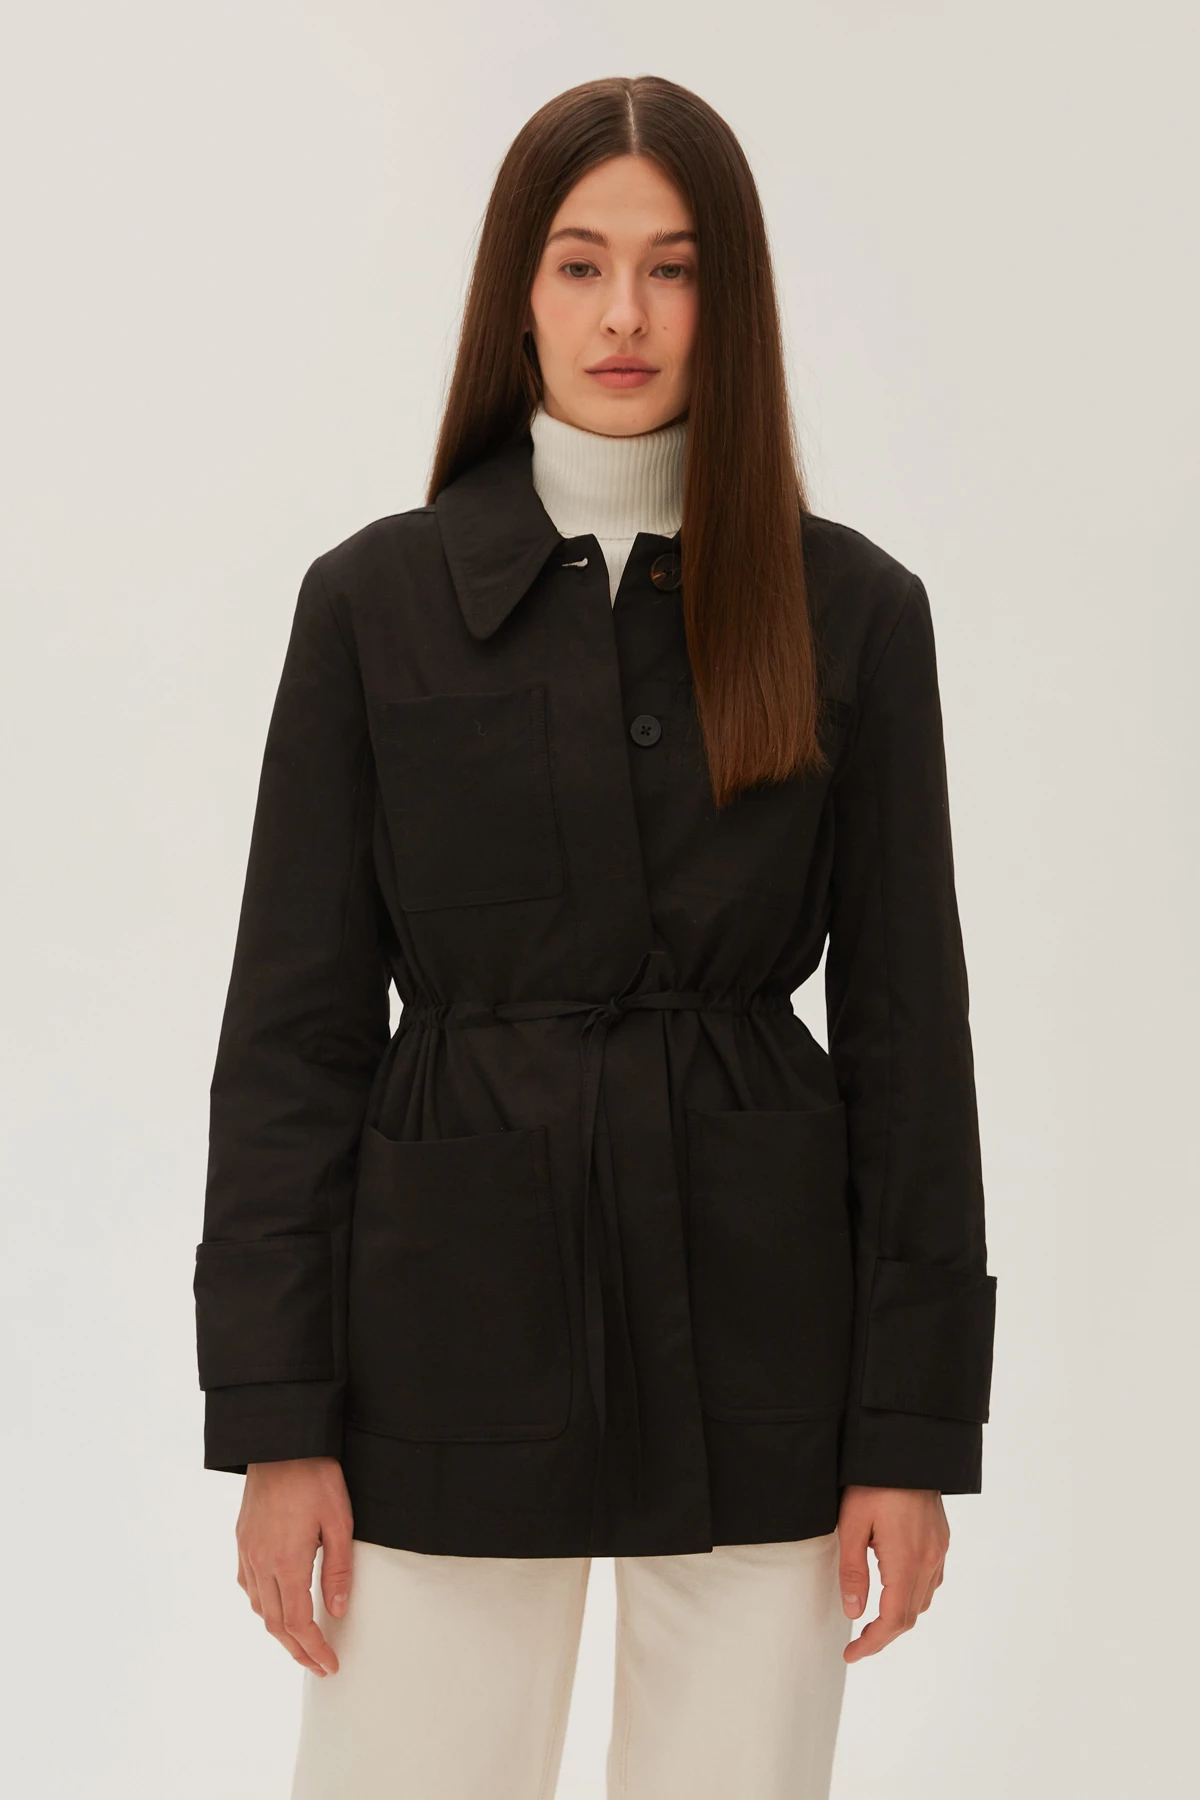 Short jacket with raincoat fabric in black color, photo 6